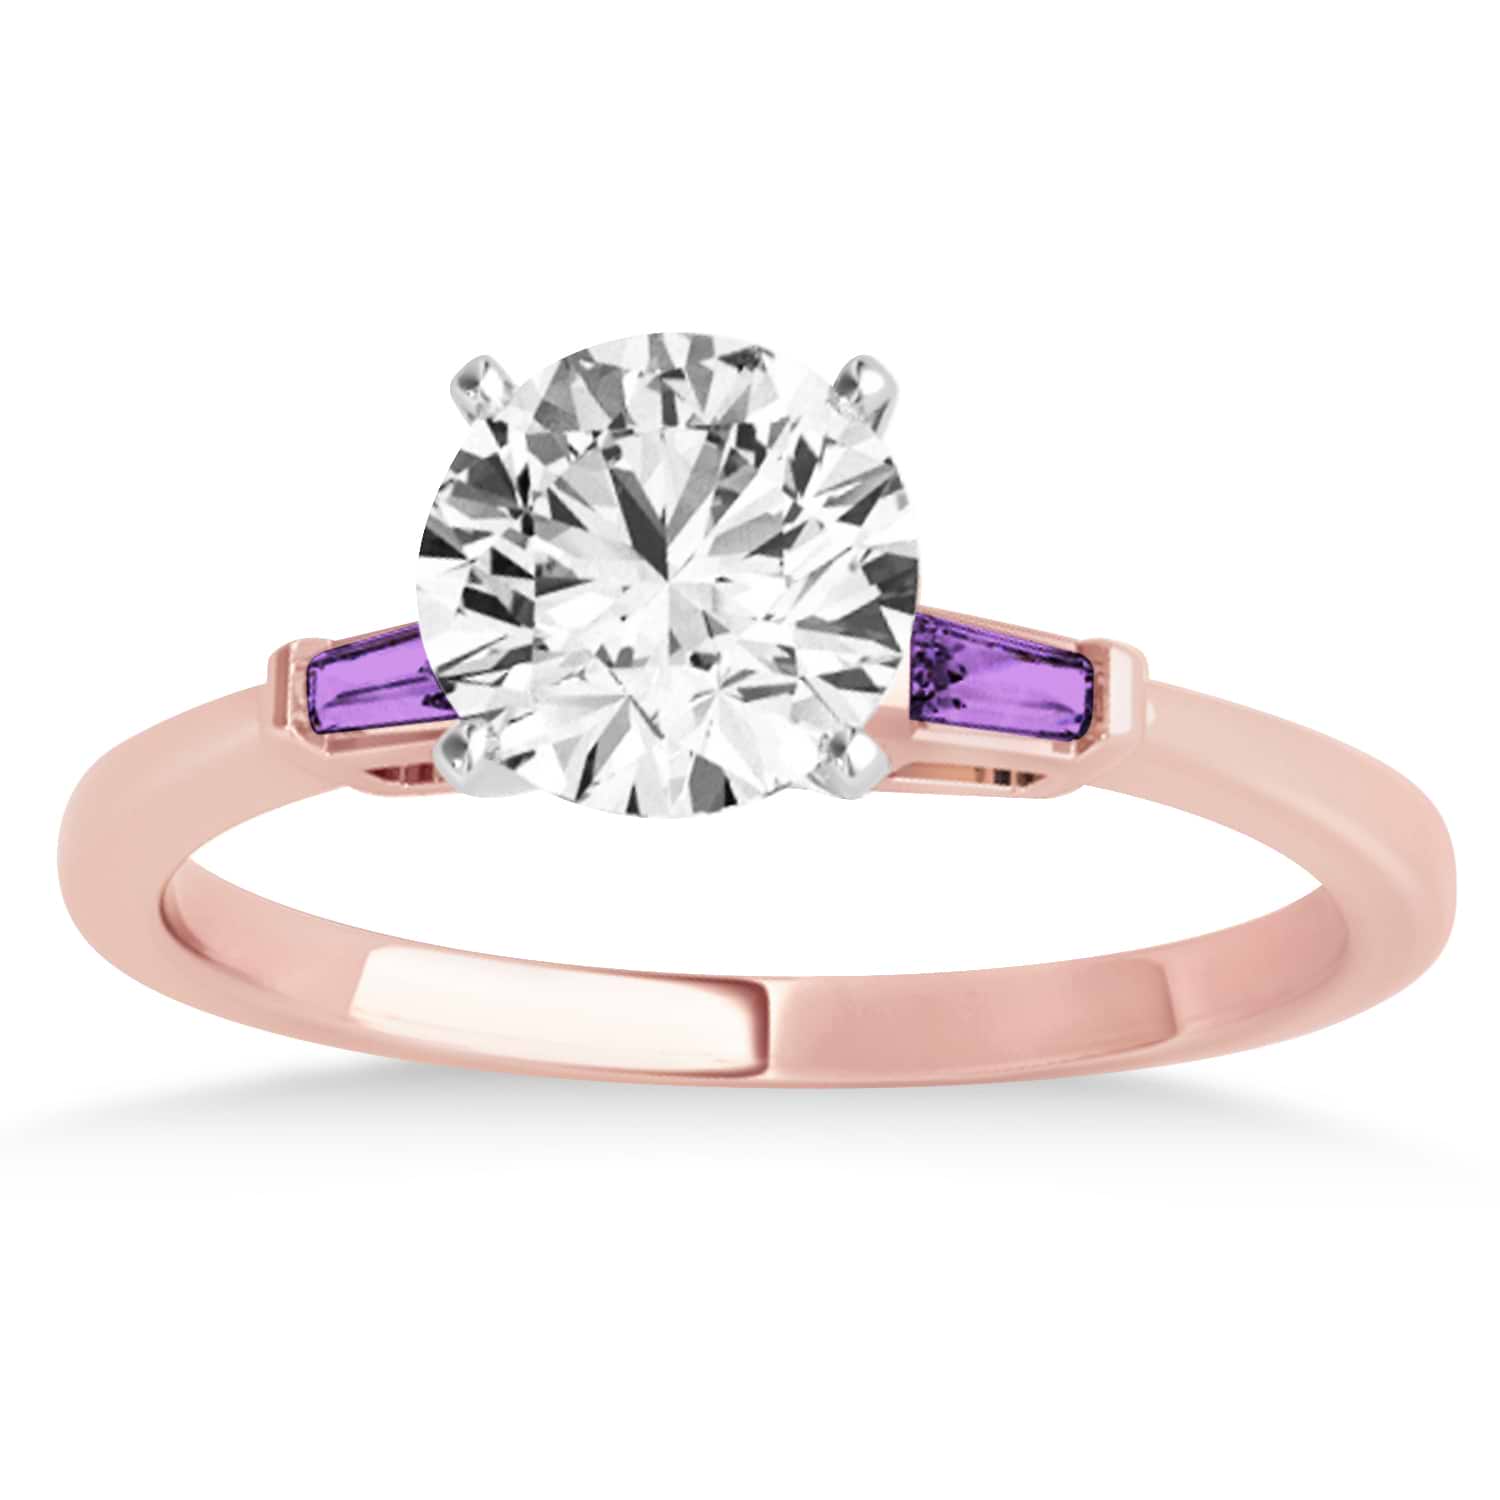 Tapered Baguette 3-Stone Amethyst Engagement Ring 18k Rose Gold (0.10ct)